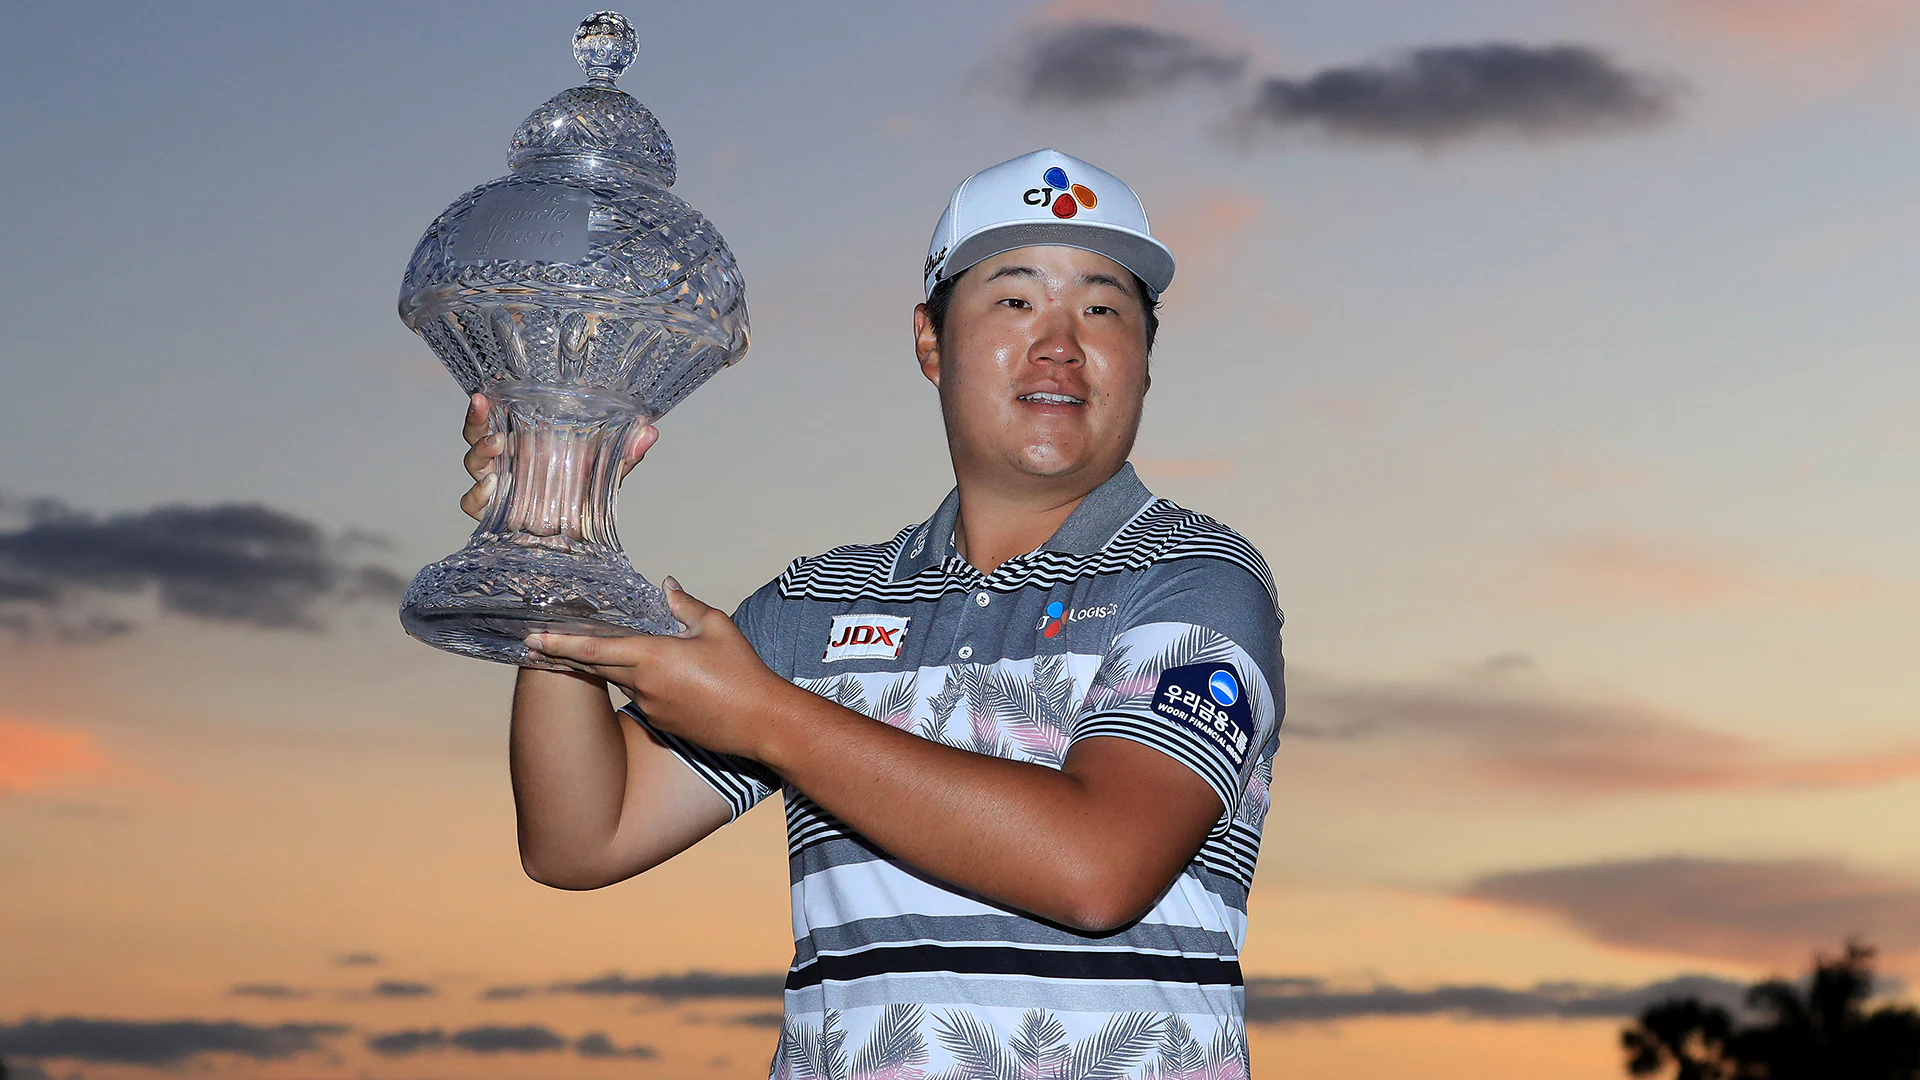 Honda Classic odds: Sungjae Im favored; just two top-15 players in field